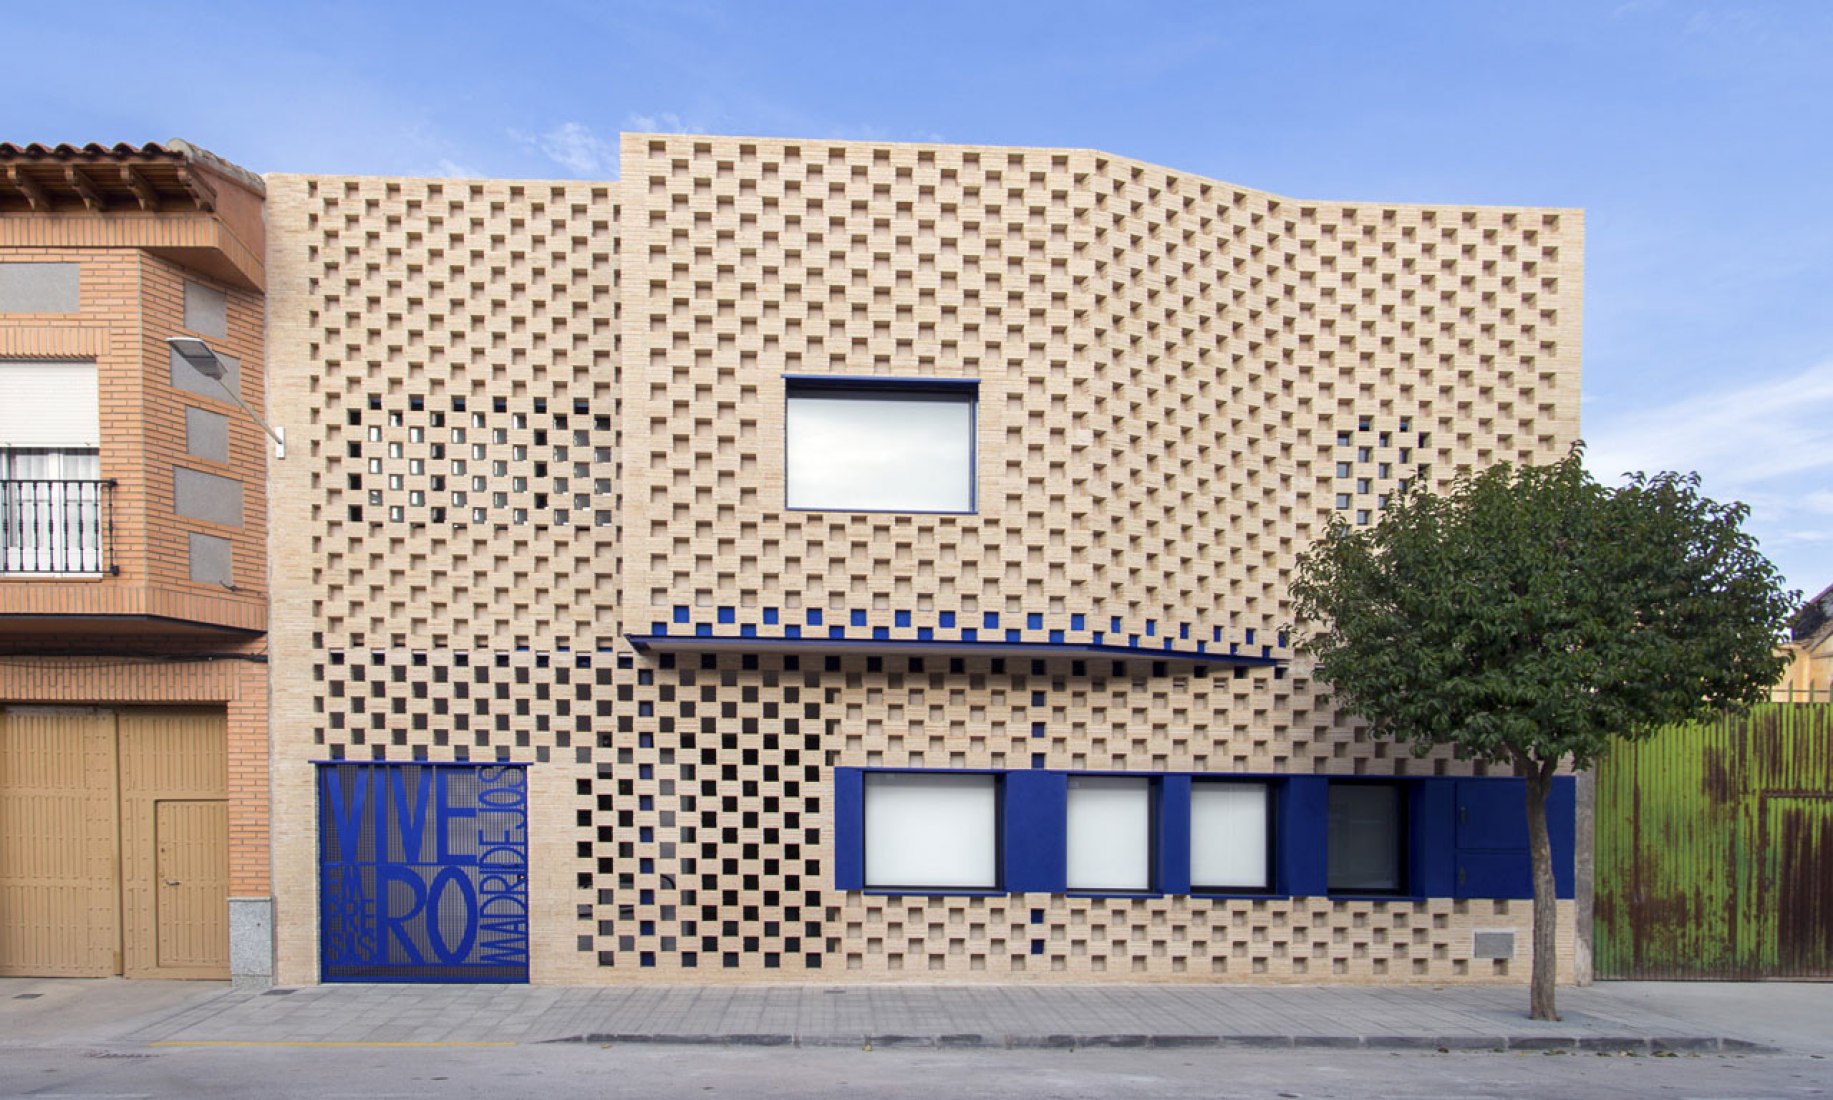 Double skin facade. Renovation of a bussiness incubator building by OOIIO. Photography © Eugenio H. Vegue, Francisco Sepúlveda.